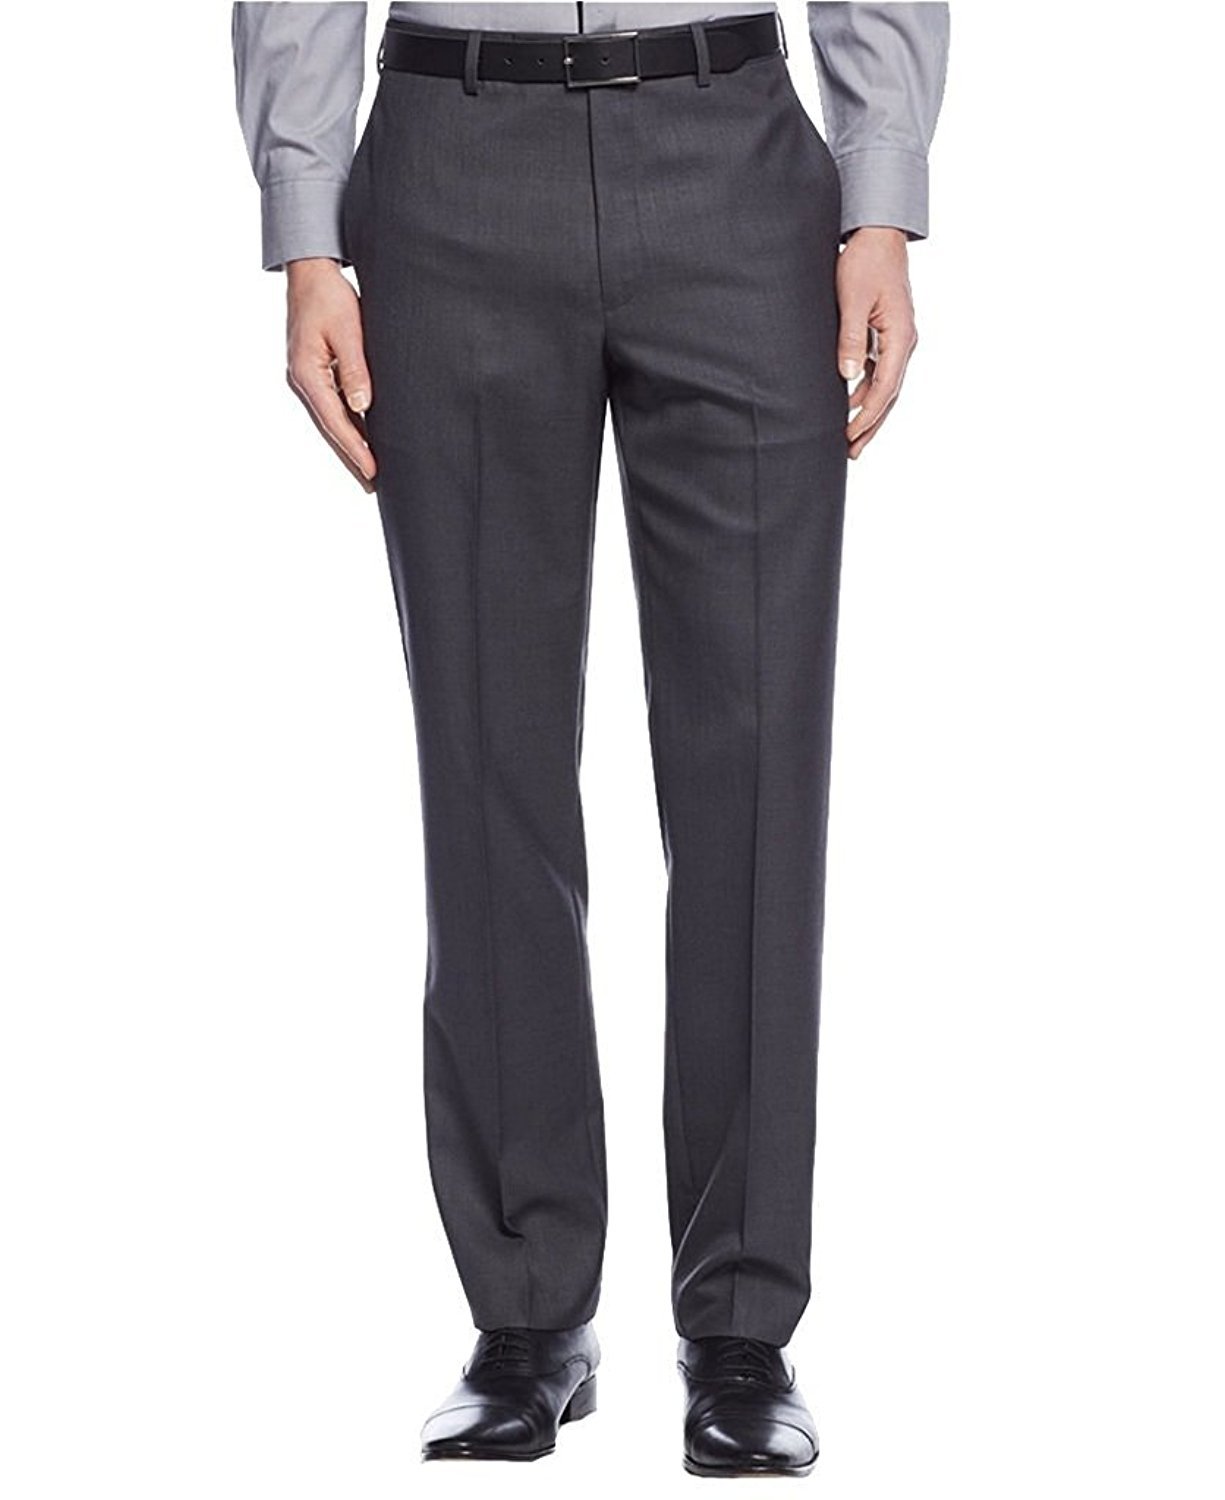 Giorgio Fiorelli Men's Slim-Tapered Fit Flat Front Solid Dress Pants ...